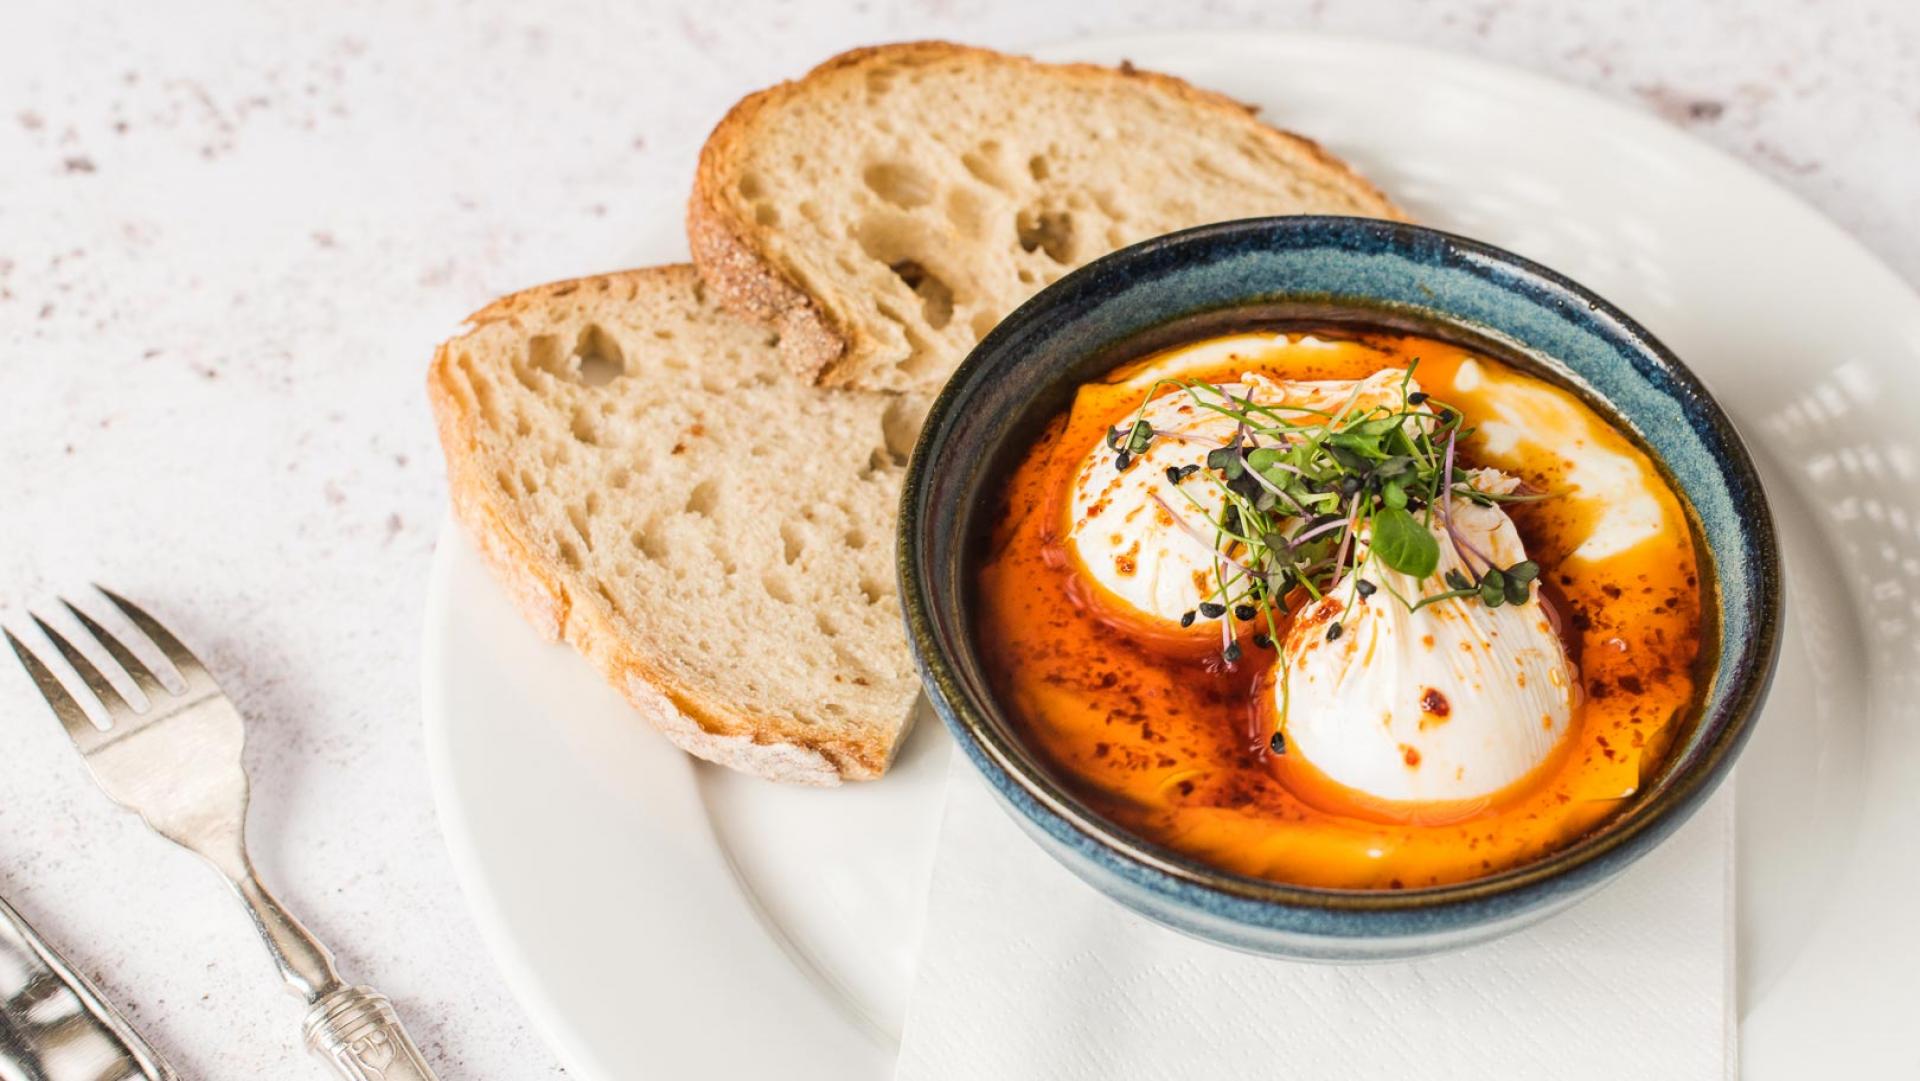 Best Brunch London: The Laundry, owned by proud Kiwi Mel Brown, pays homage to Kiwi chef Peter Gordon by serving his famous Turkish eggs